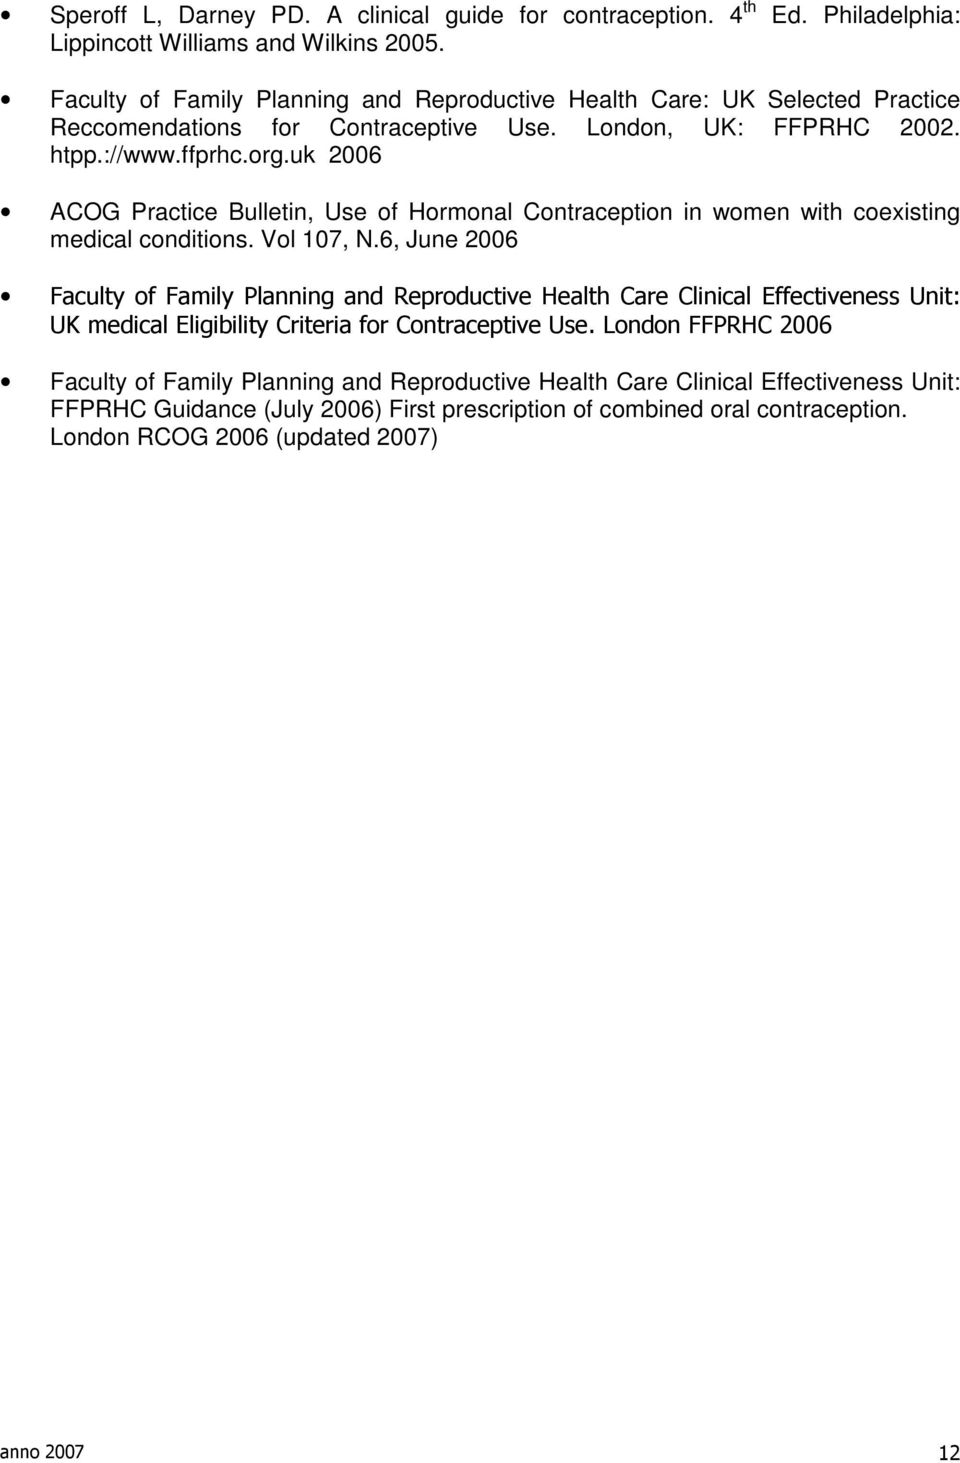 uk 2006 ACOG Practice Bulletin, Use of Hormonal Contraception in women with coexisting medical conditions. Vol 107, N.